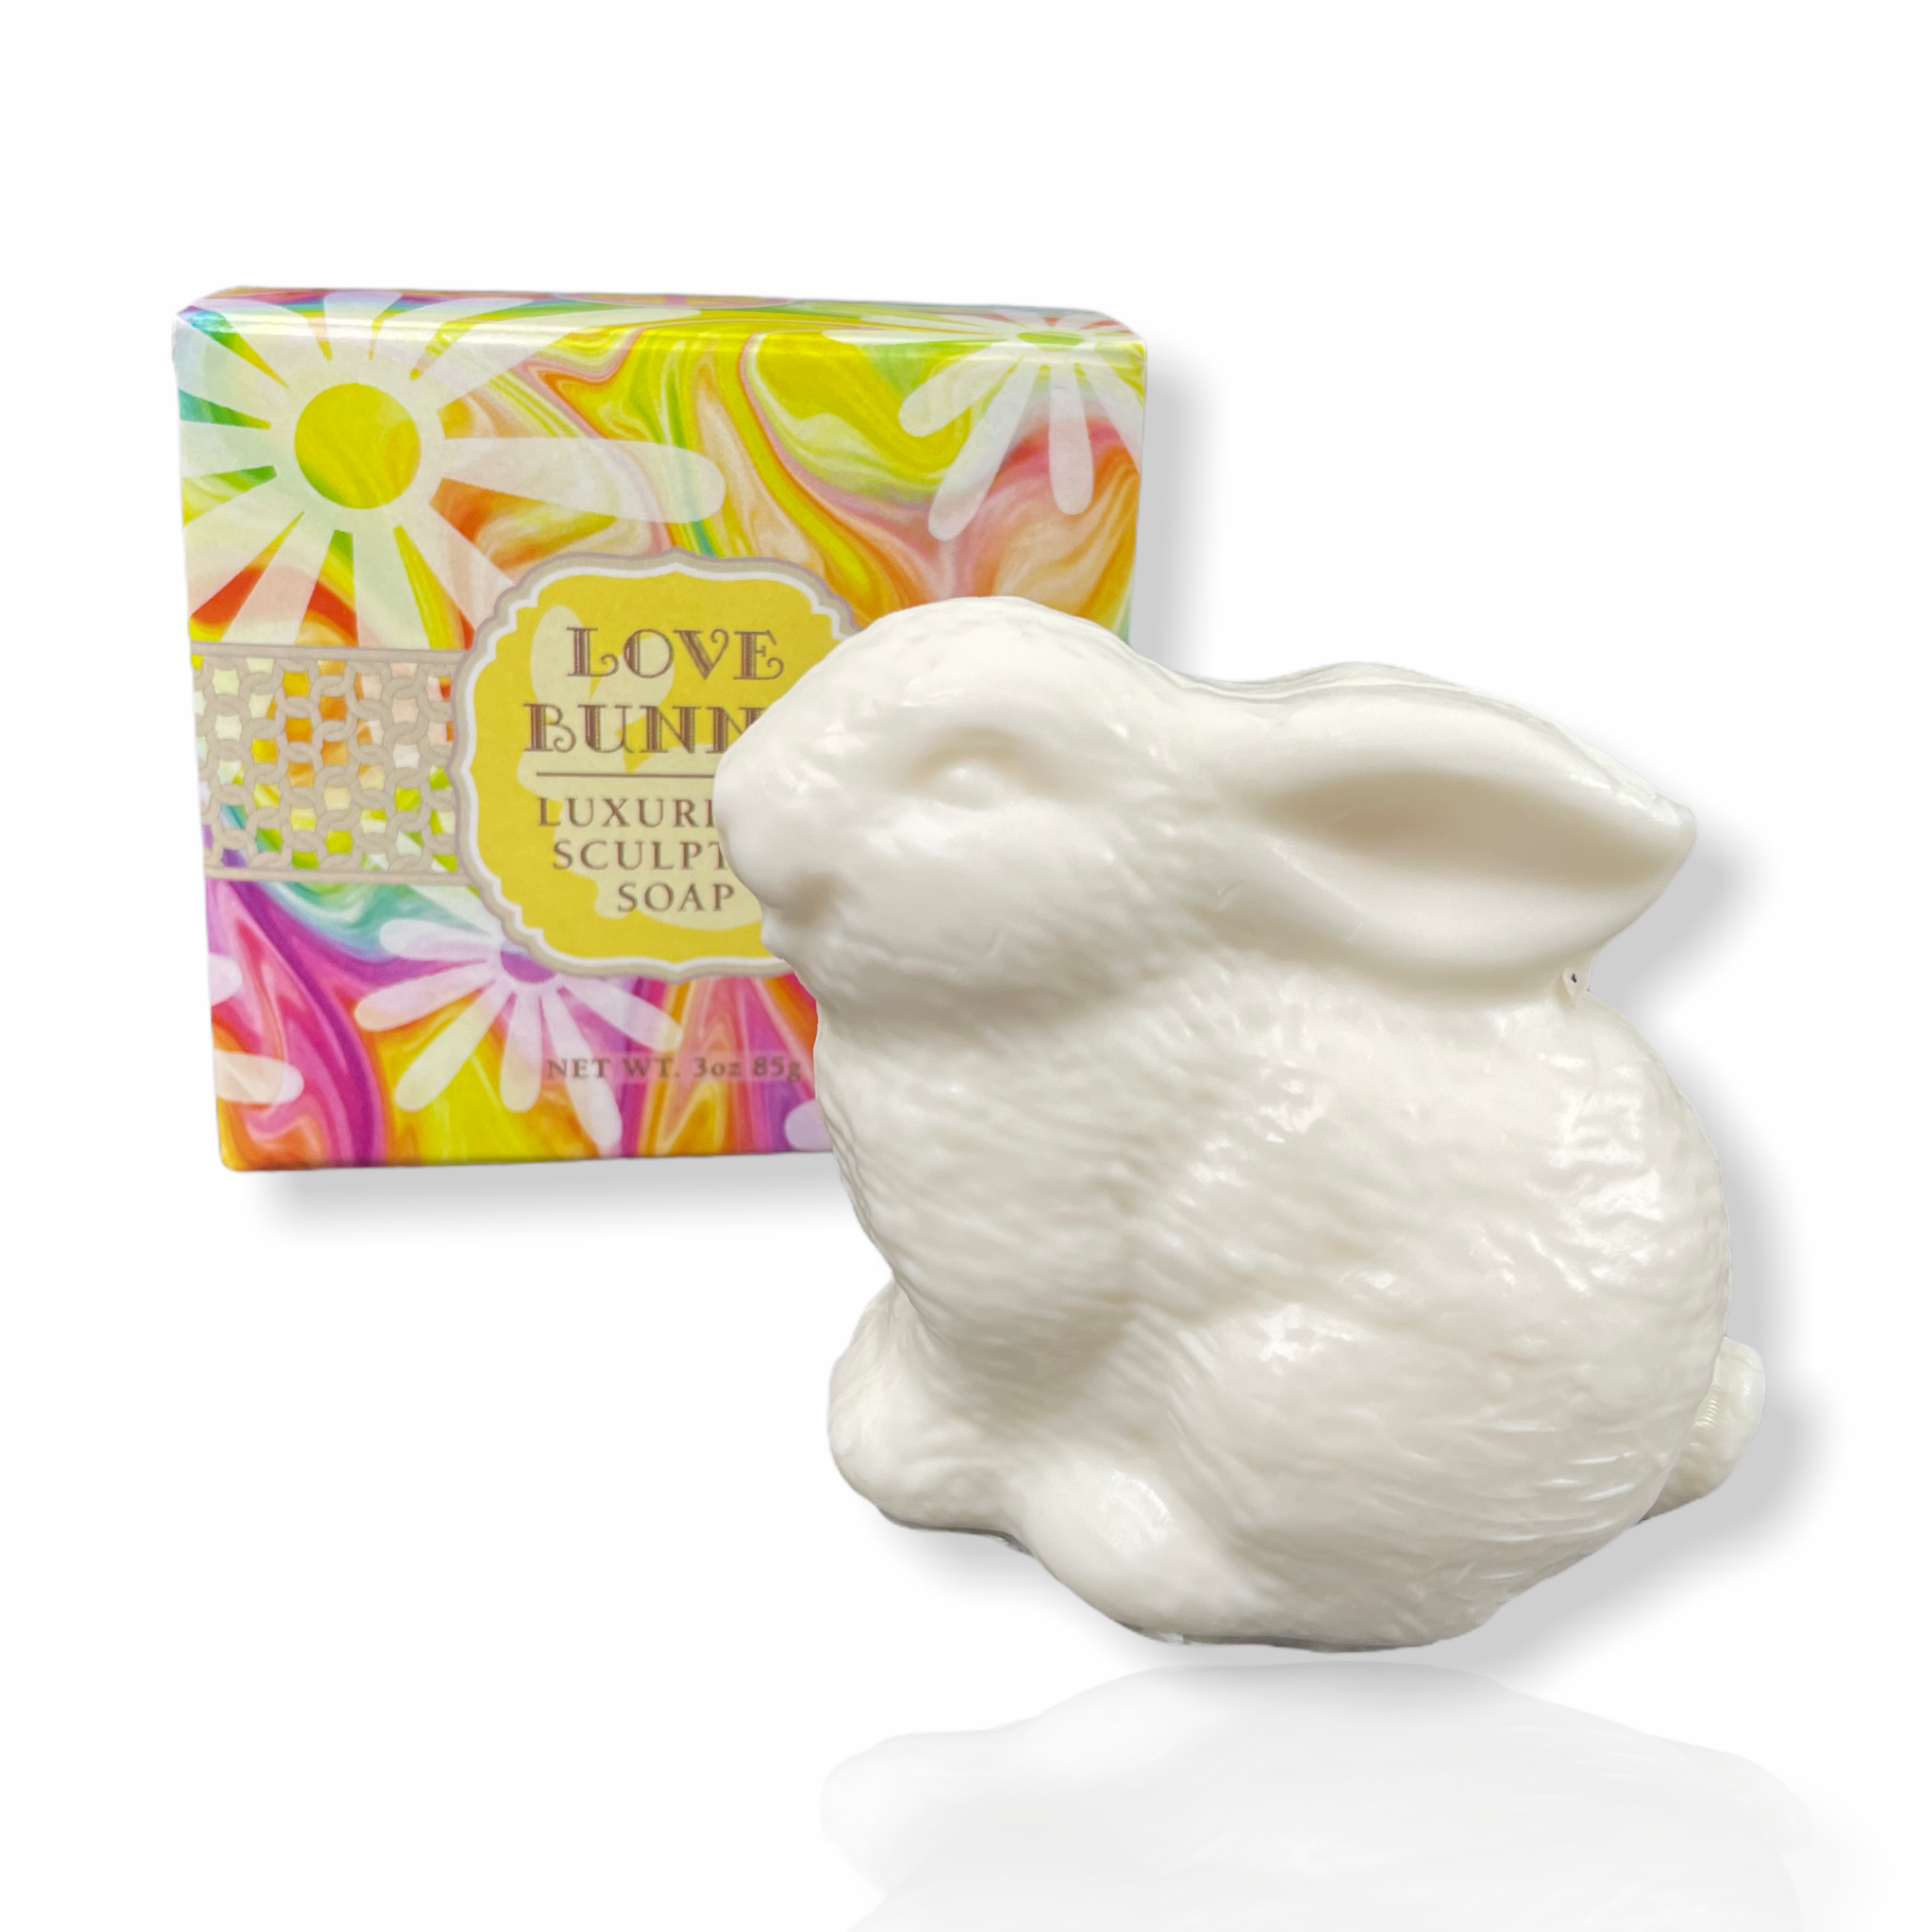 Soaps - GREENWICH BAY - Bunny Soaps